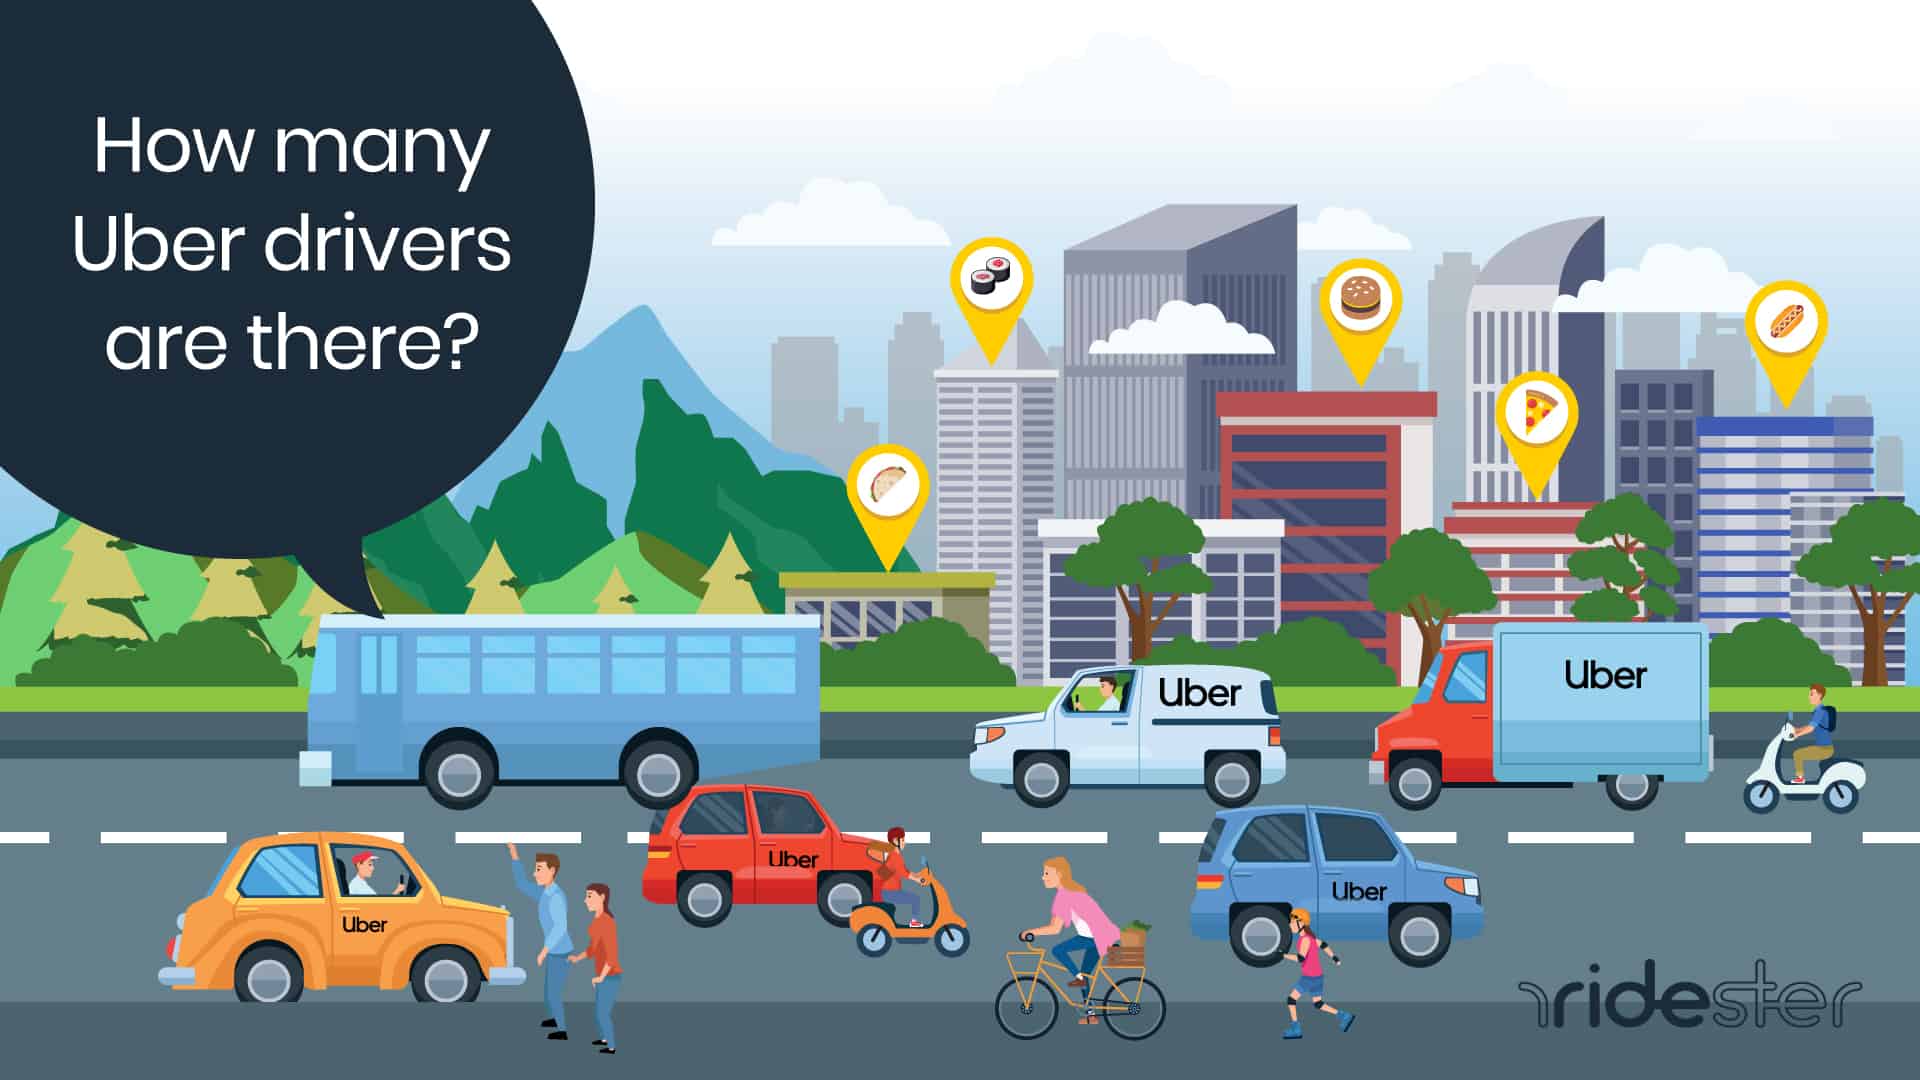 vector graphic showing uber drivers in traffic with the text "how many uber drivers are there" above it